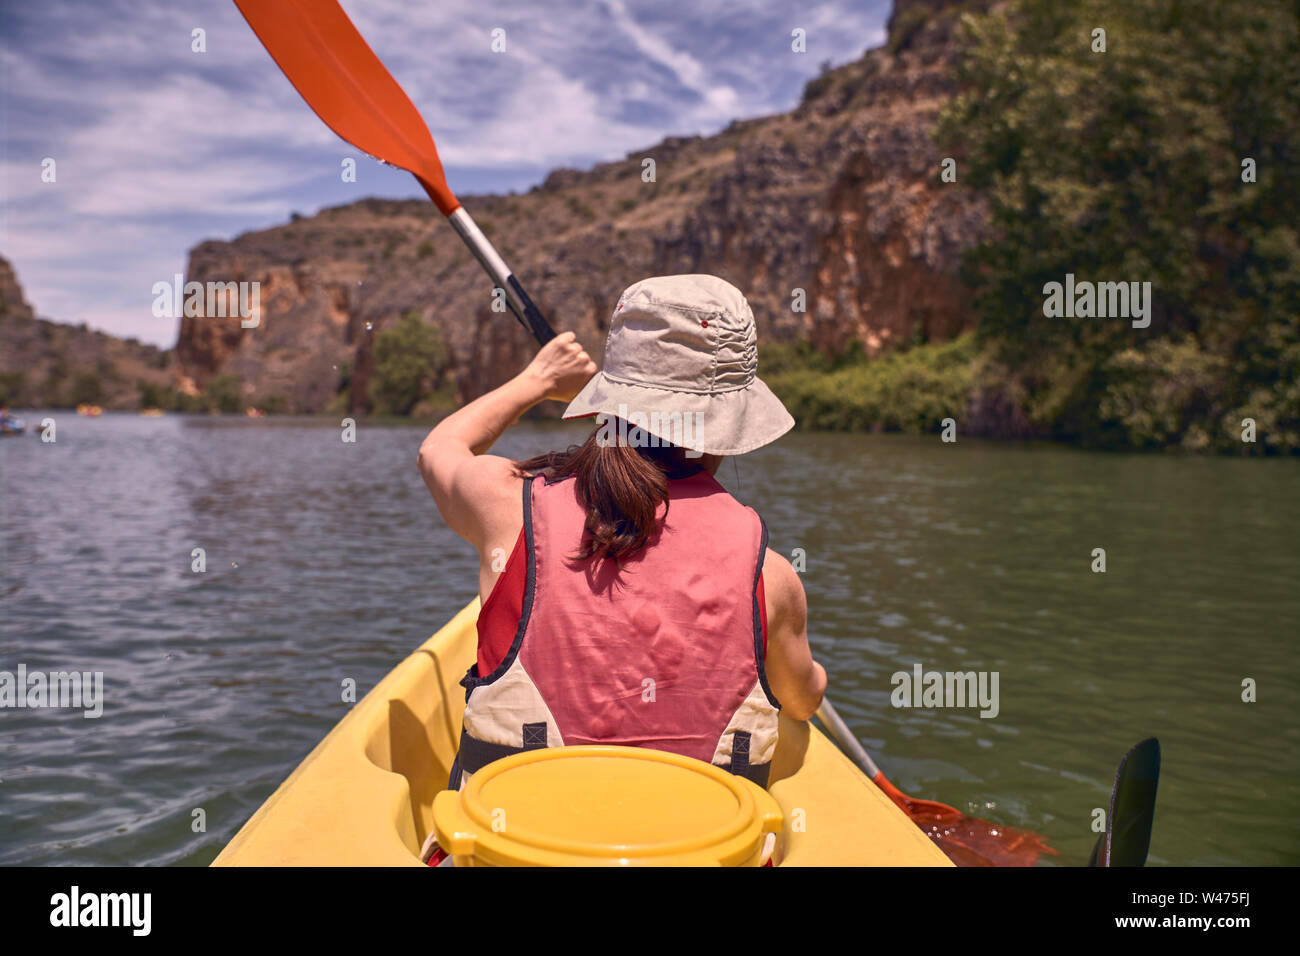 Rear view of woman while kayaking in river Stock Photo